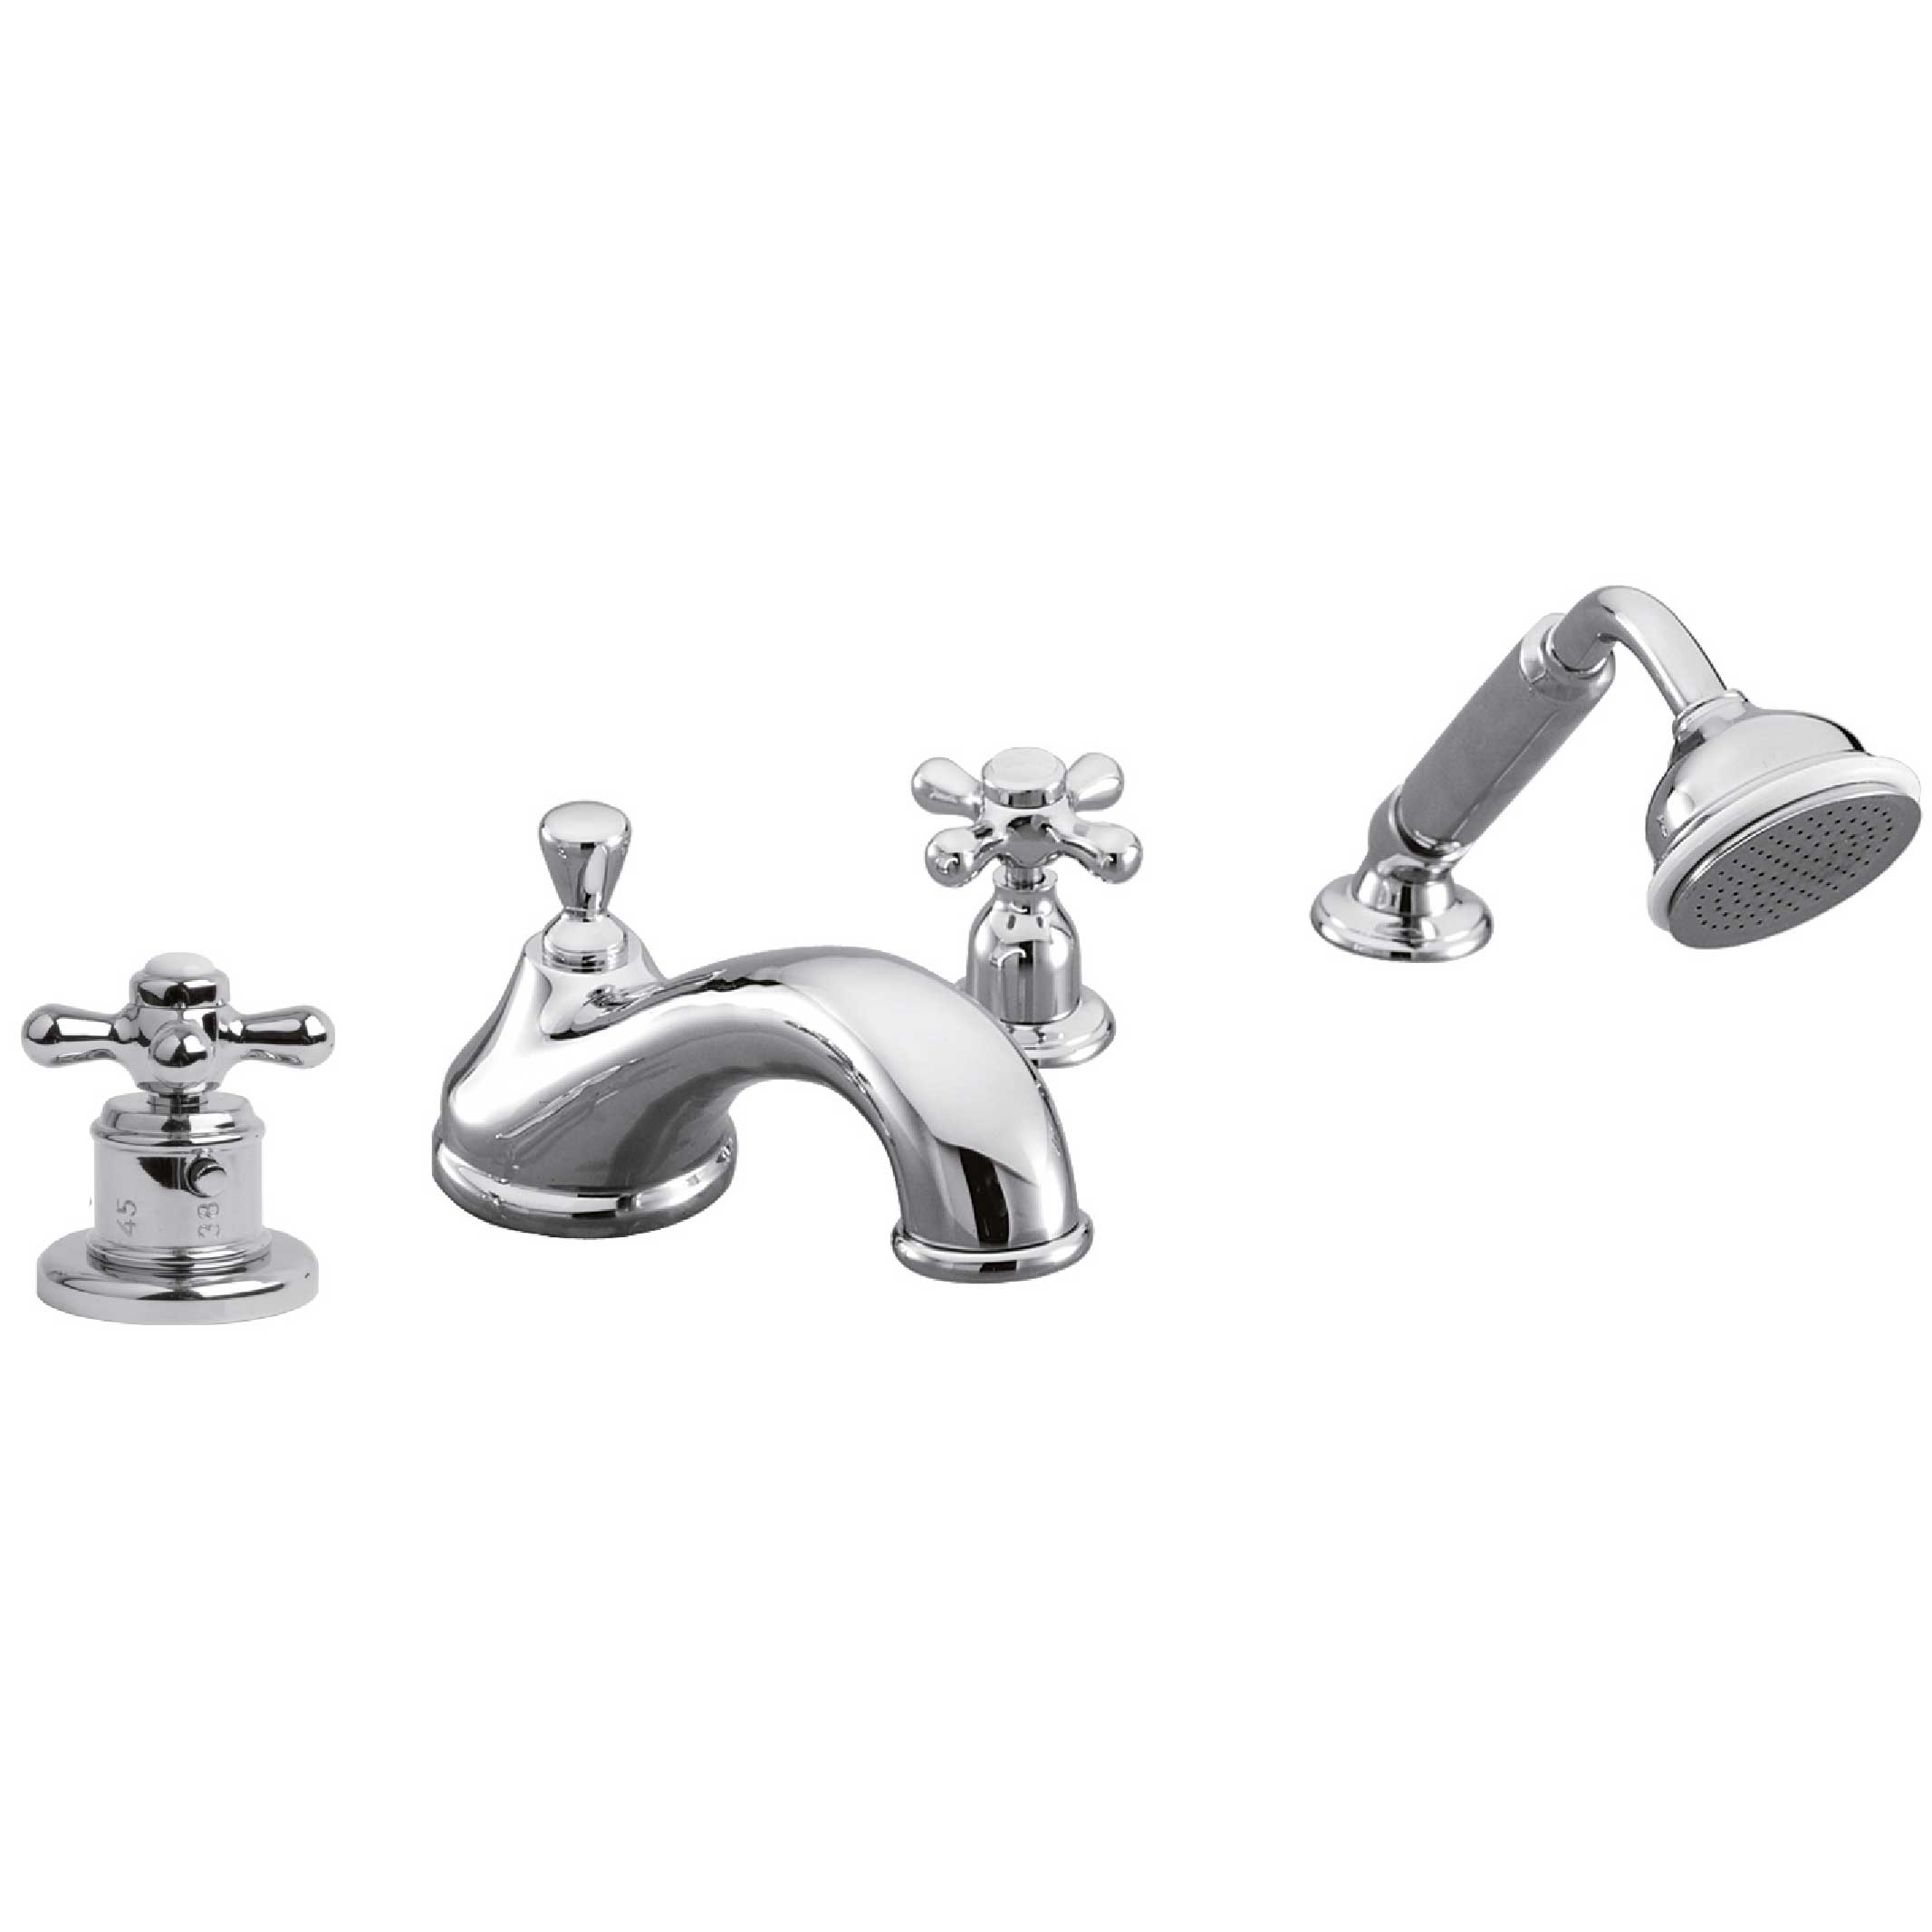 M40-3304T 4-hole bath and shower thermo. mixer